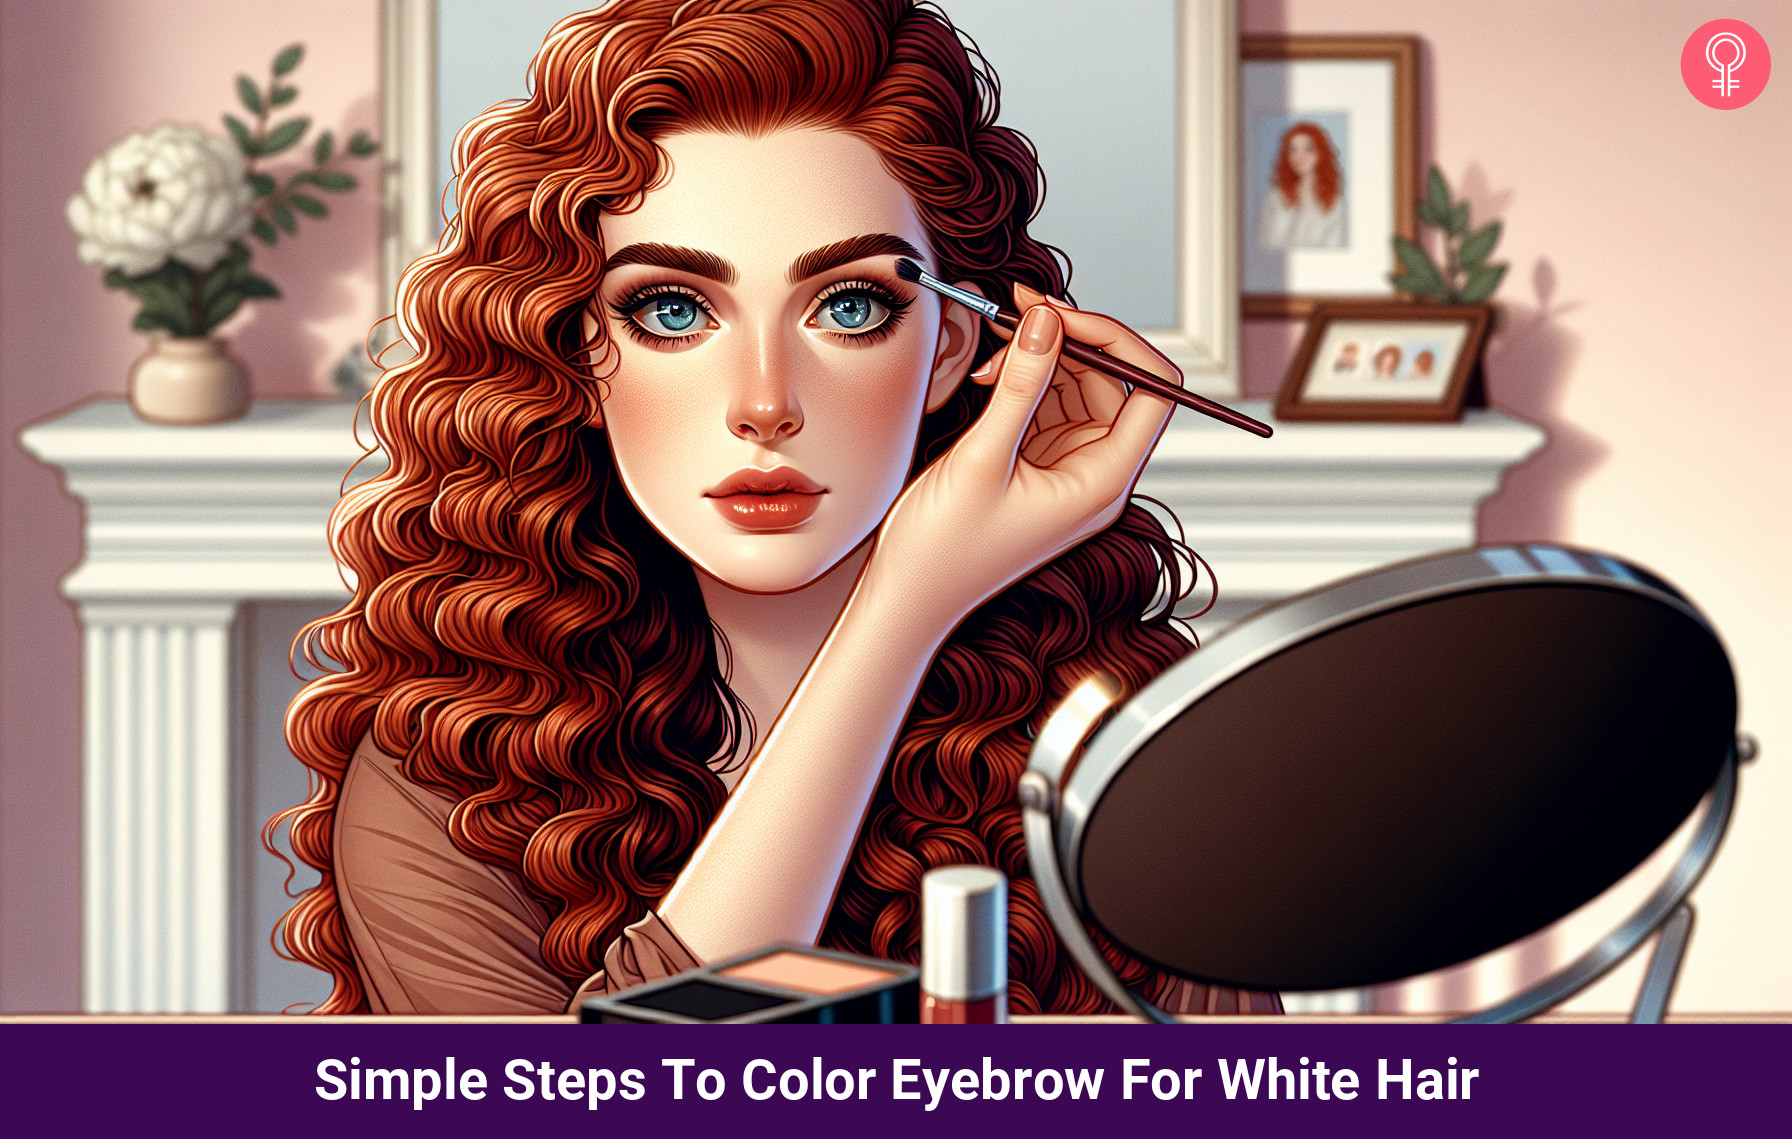 Steps To Color Eyebrow For White Hair